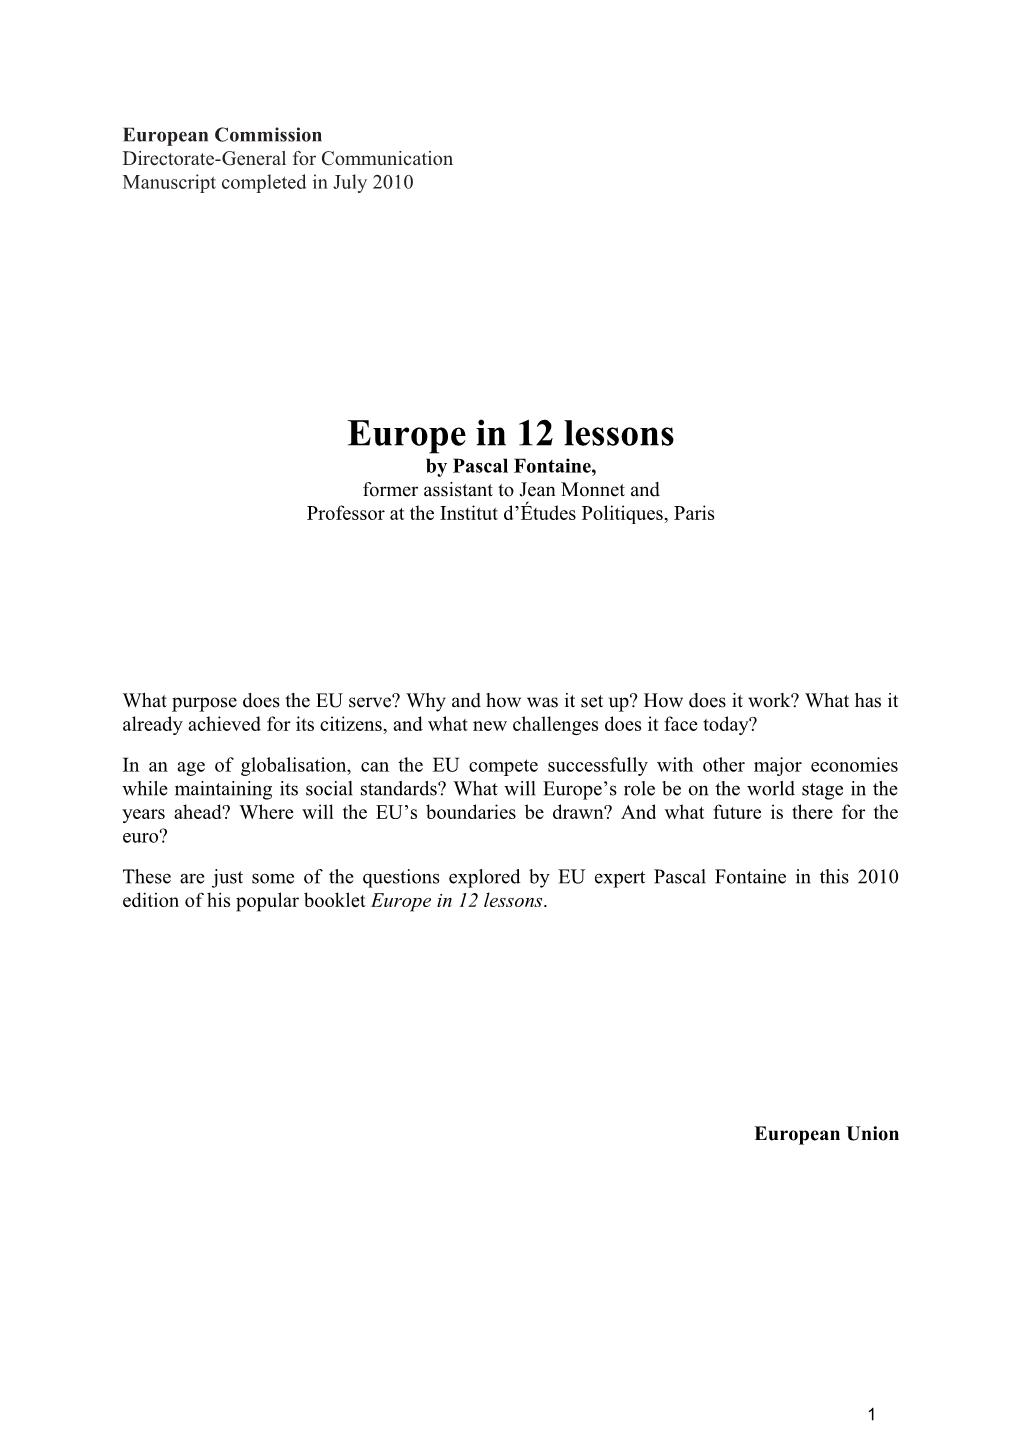 Europe in 12 Lessons